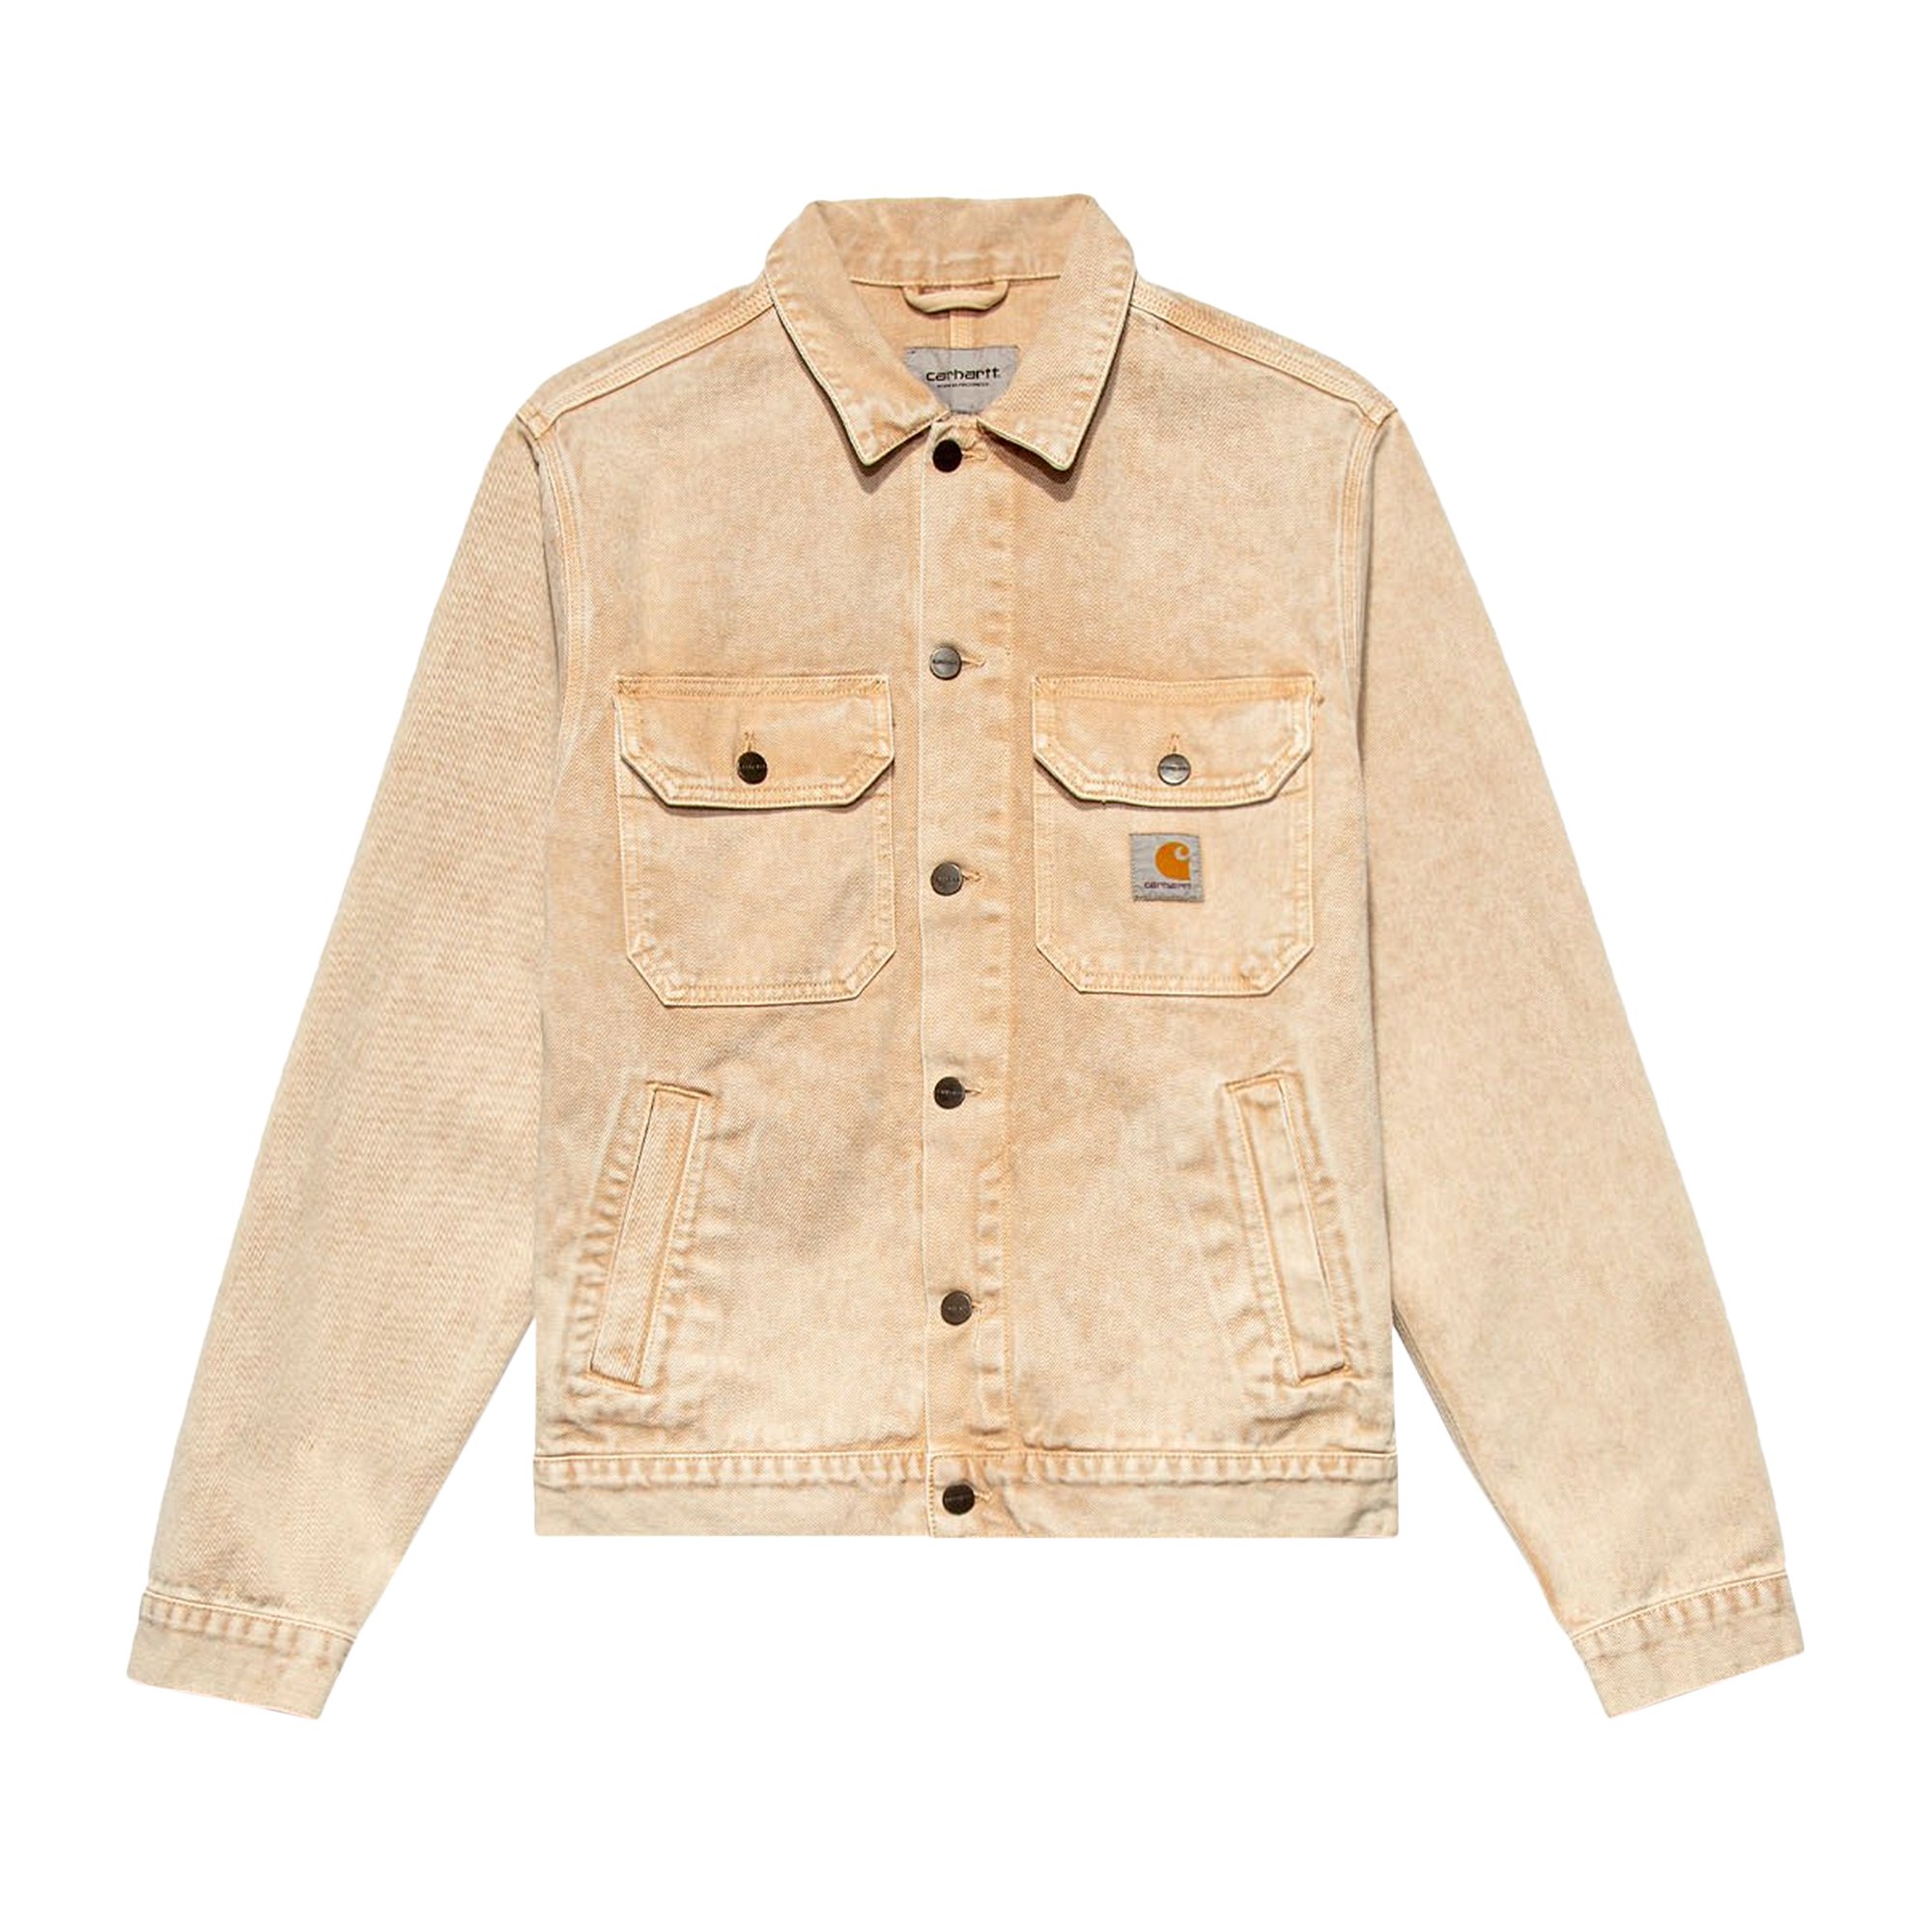 Carhartt WIP Stetson Jacket 'Dusty H Brown Worn Washed' | GOAT